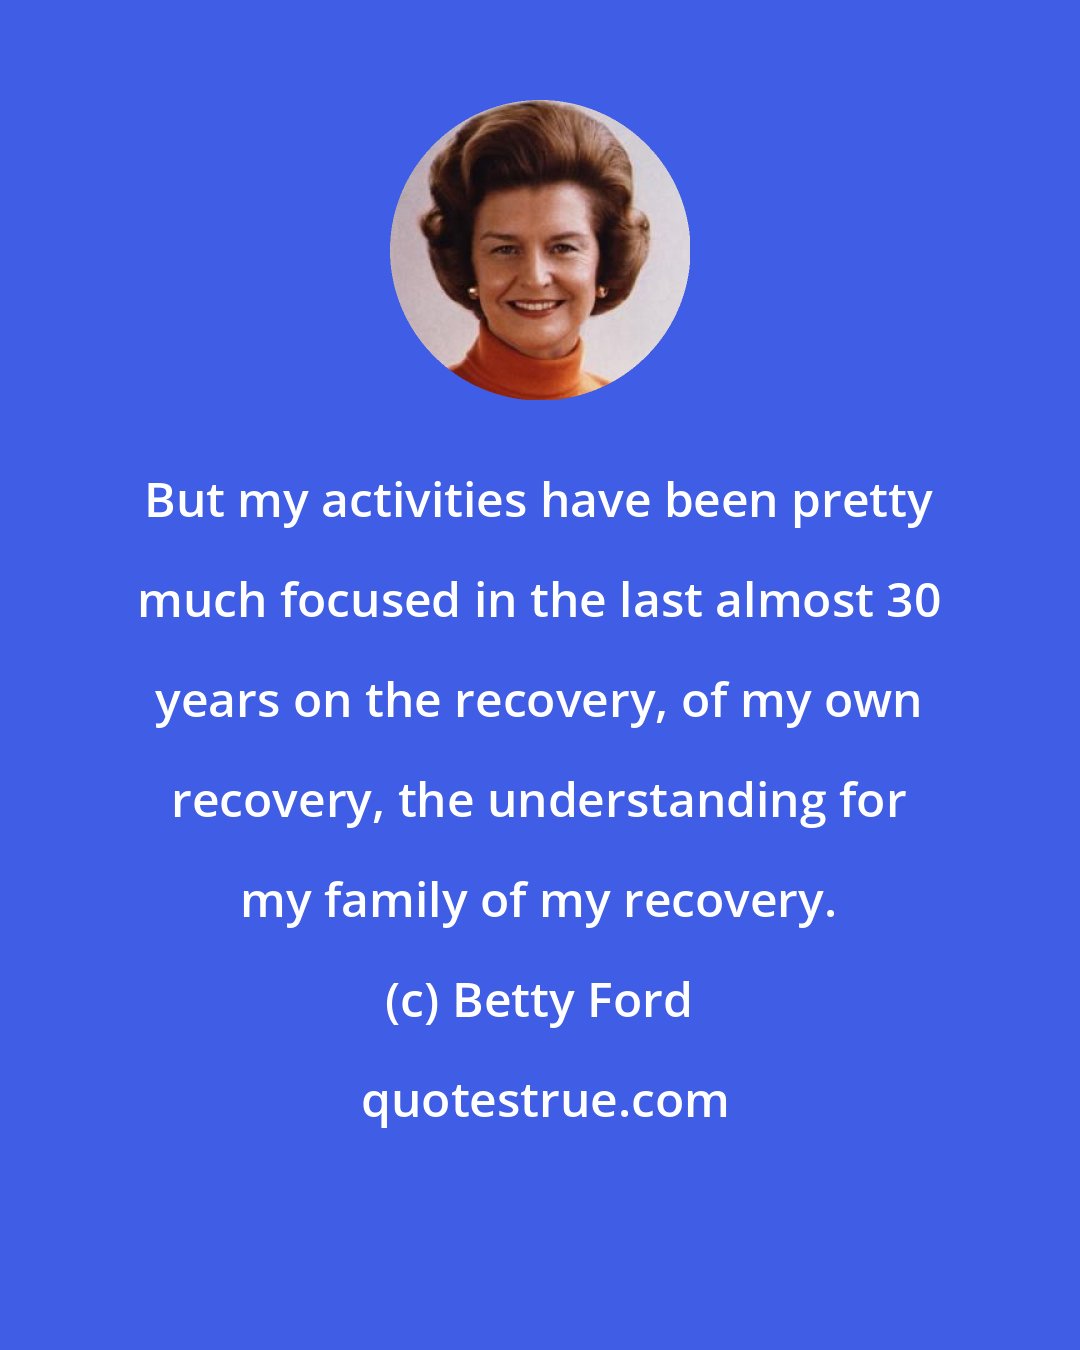 Betty Ford: But my activities have been pretty much focused in the last almost 30 years on the recovery, of my own recovery, the understanding for my family of my recovery.